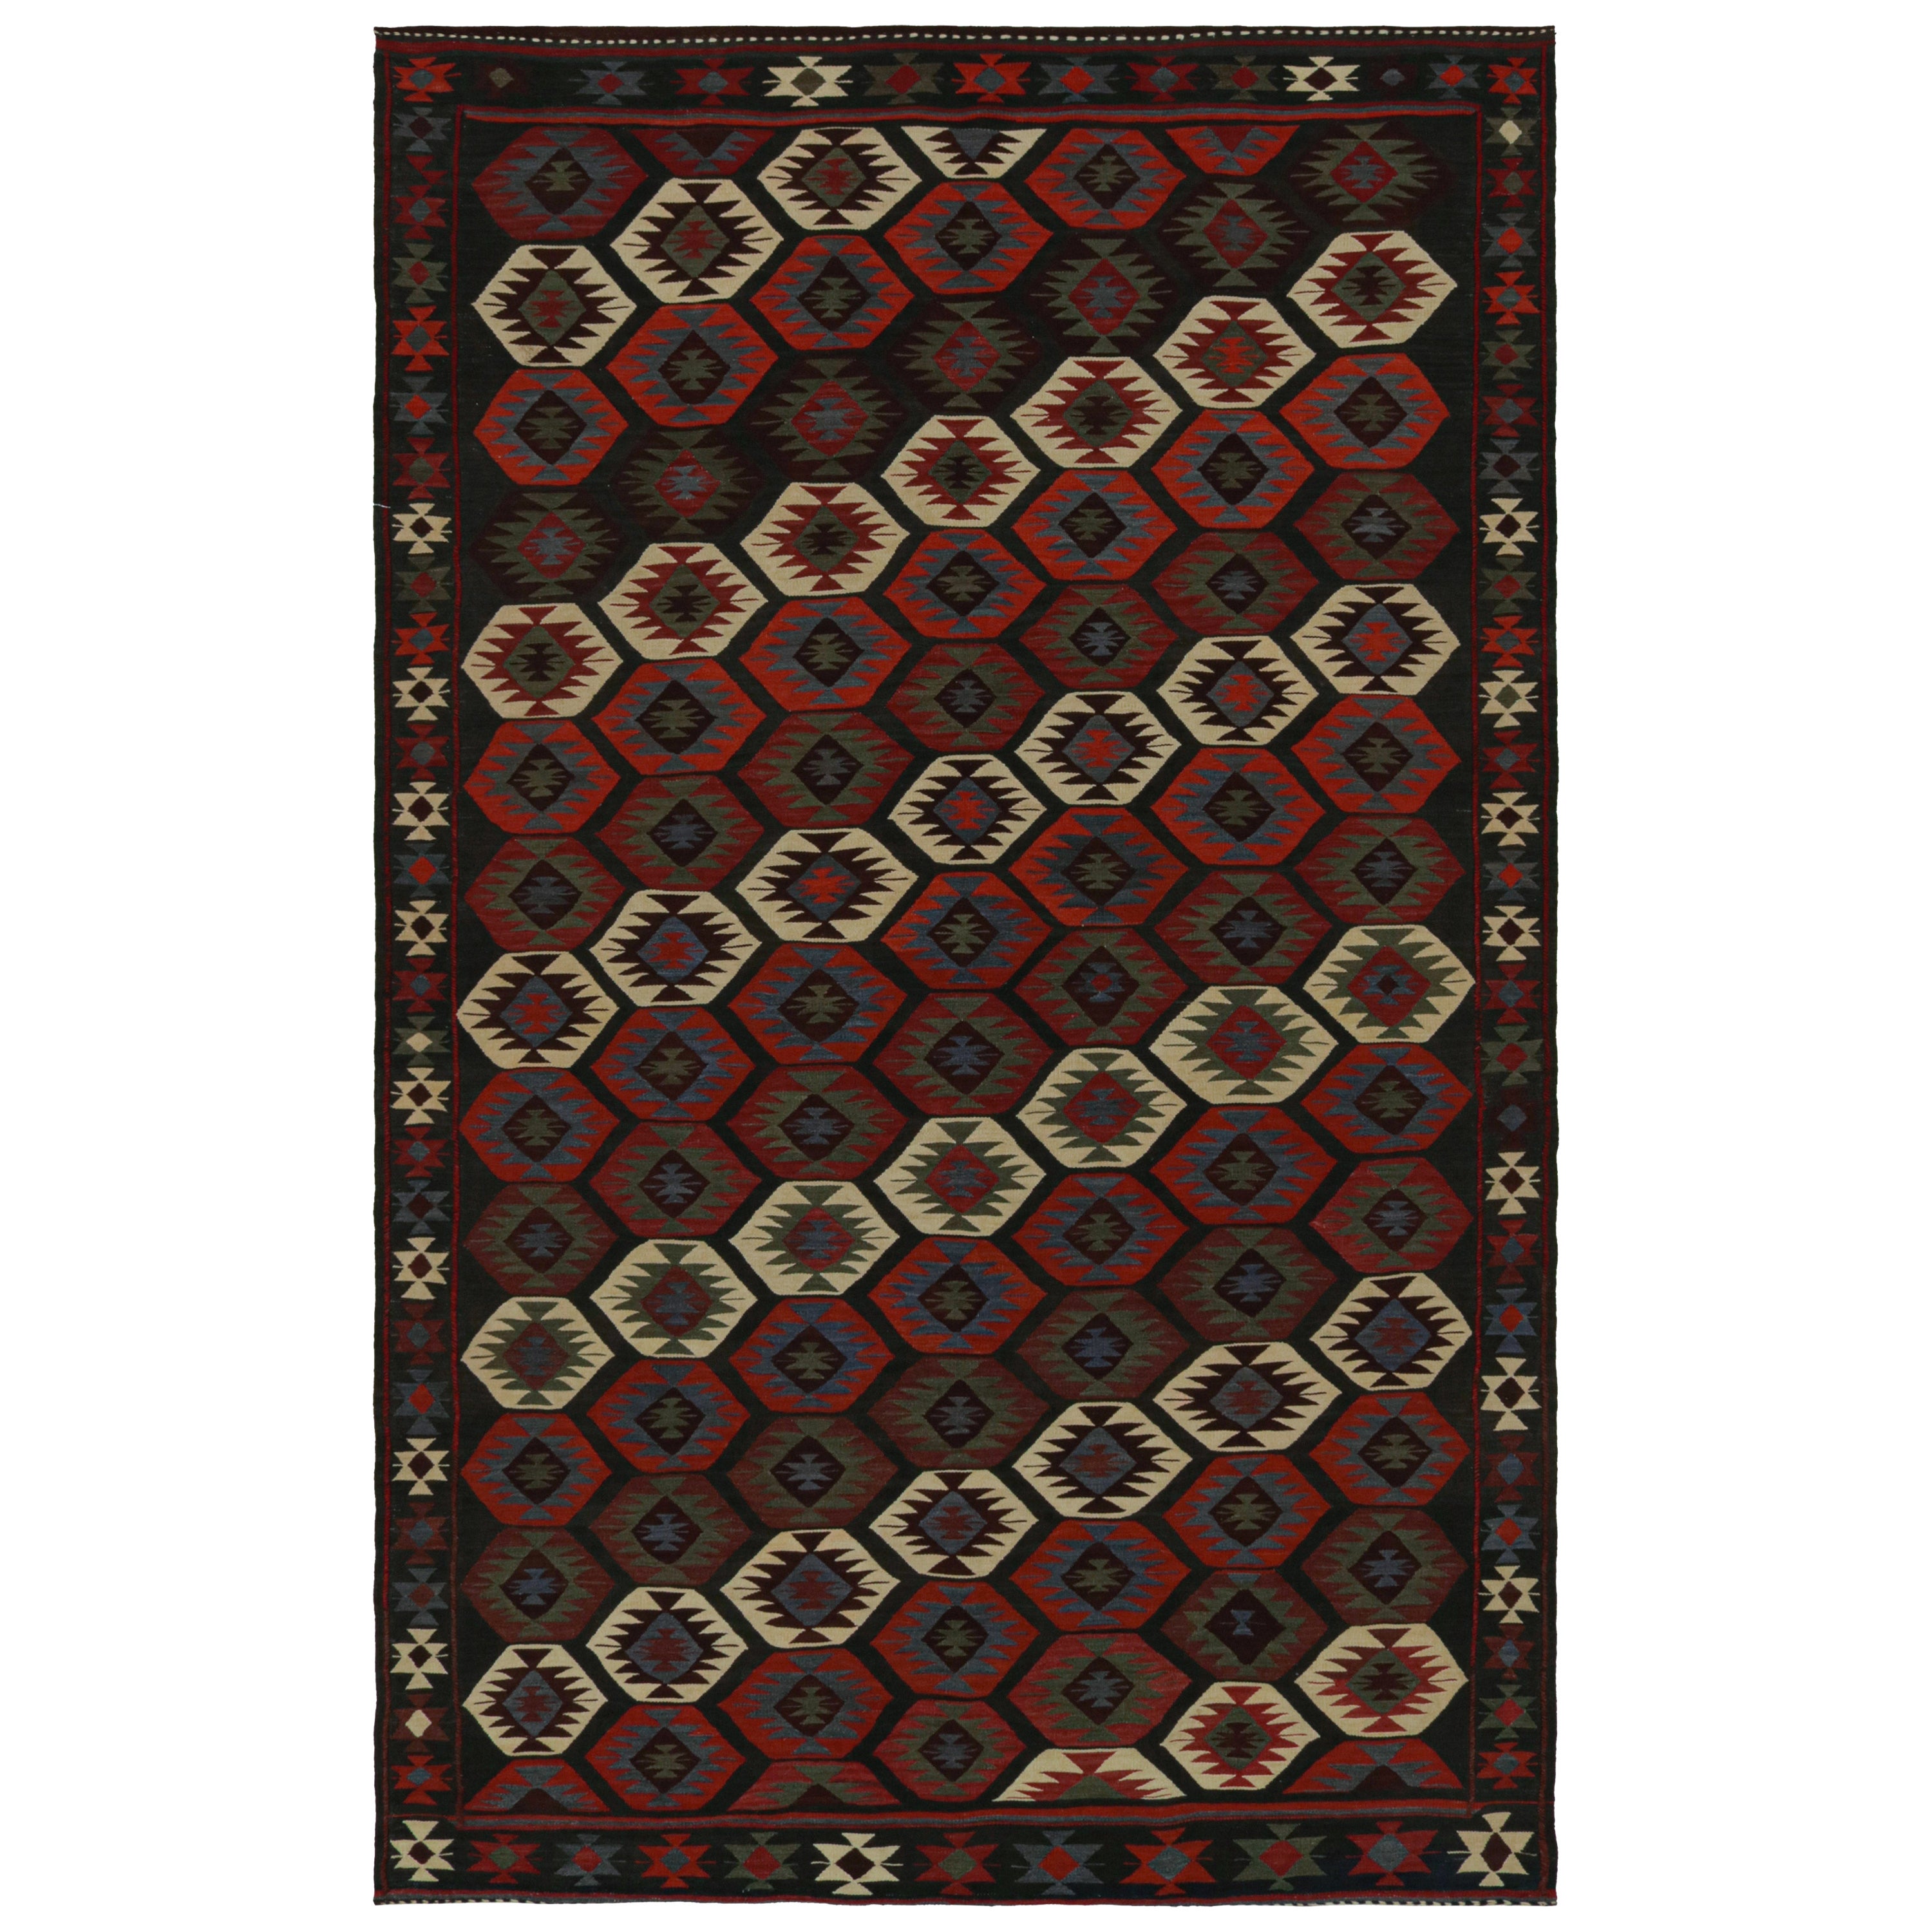 Vintage Afghan Tribal Kilim with Red & Blue Geometric Patterns, from Rug & Kilim For Sale